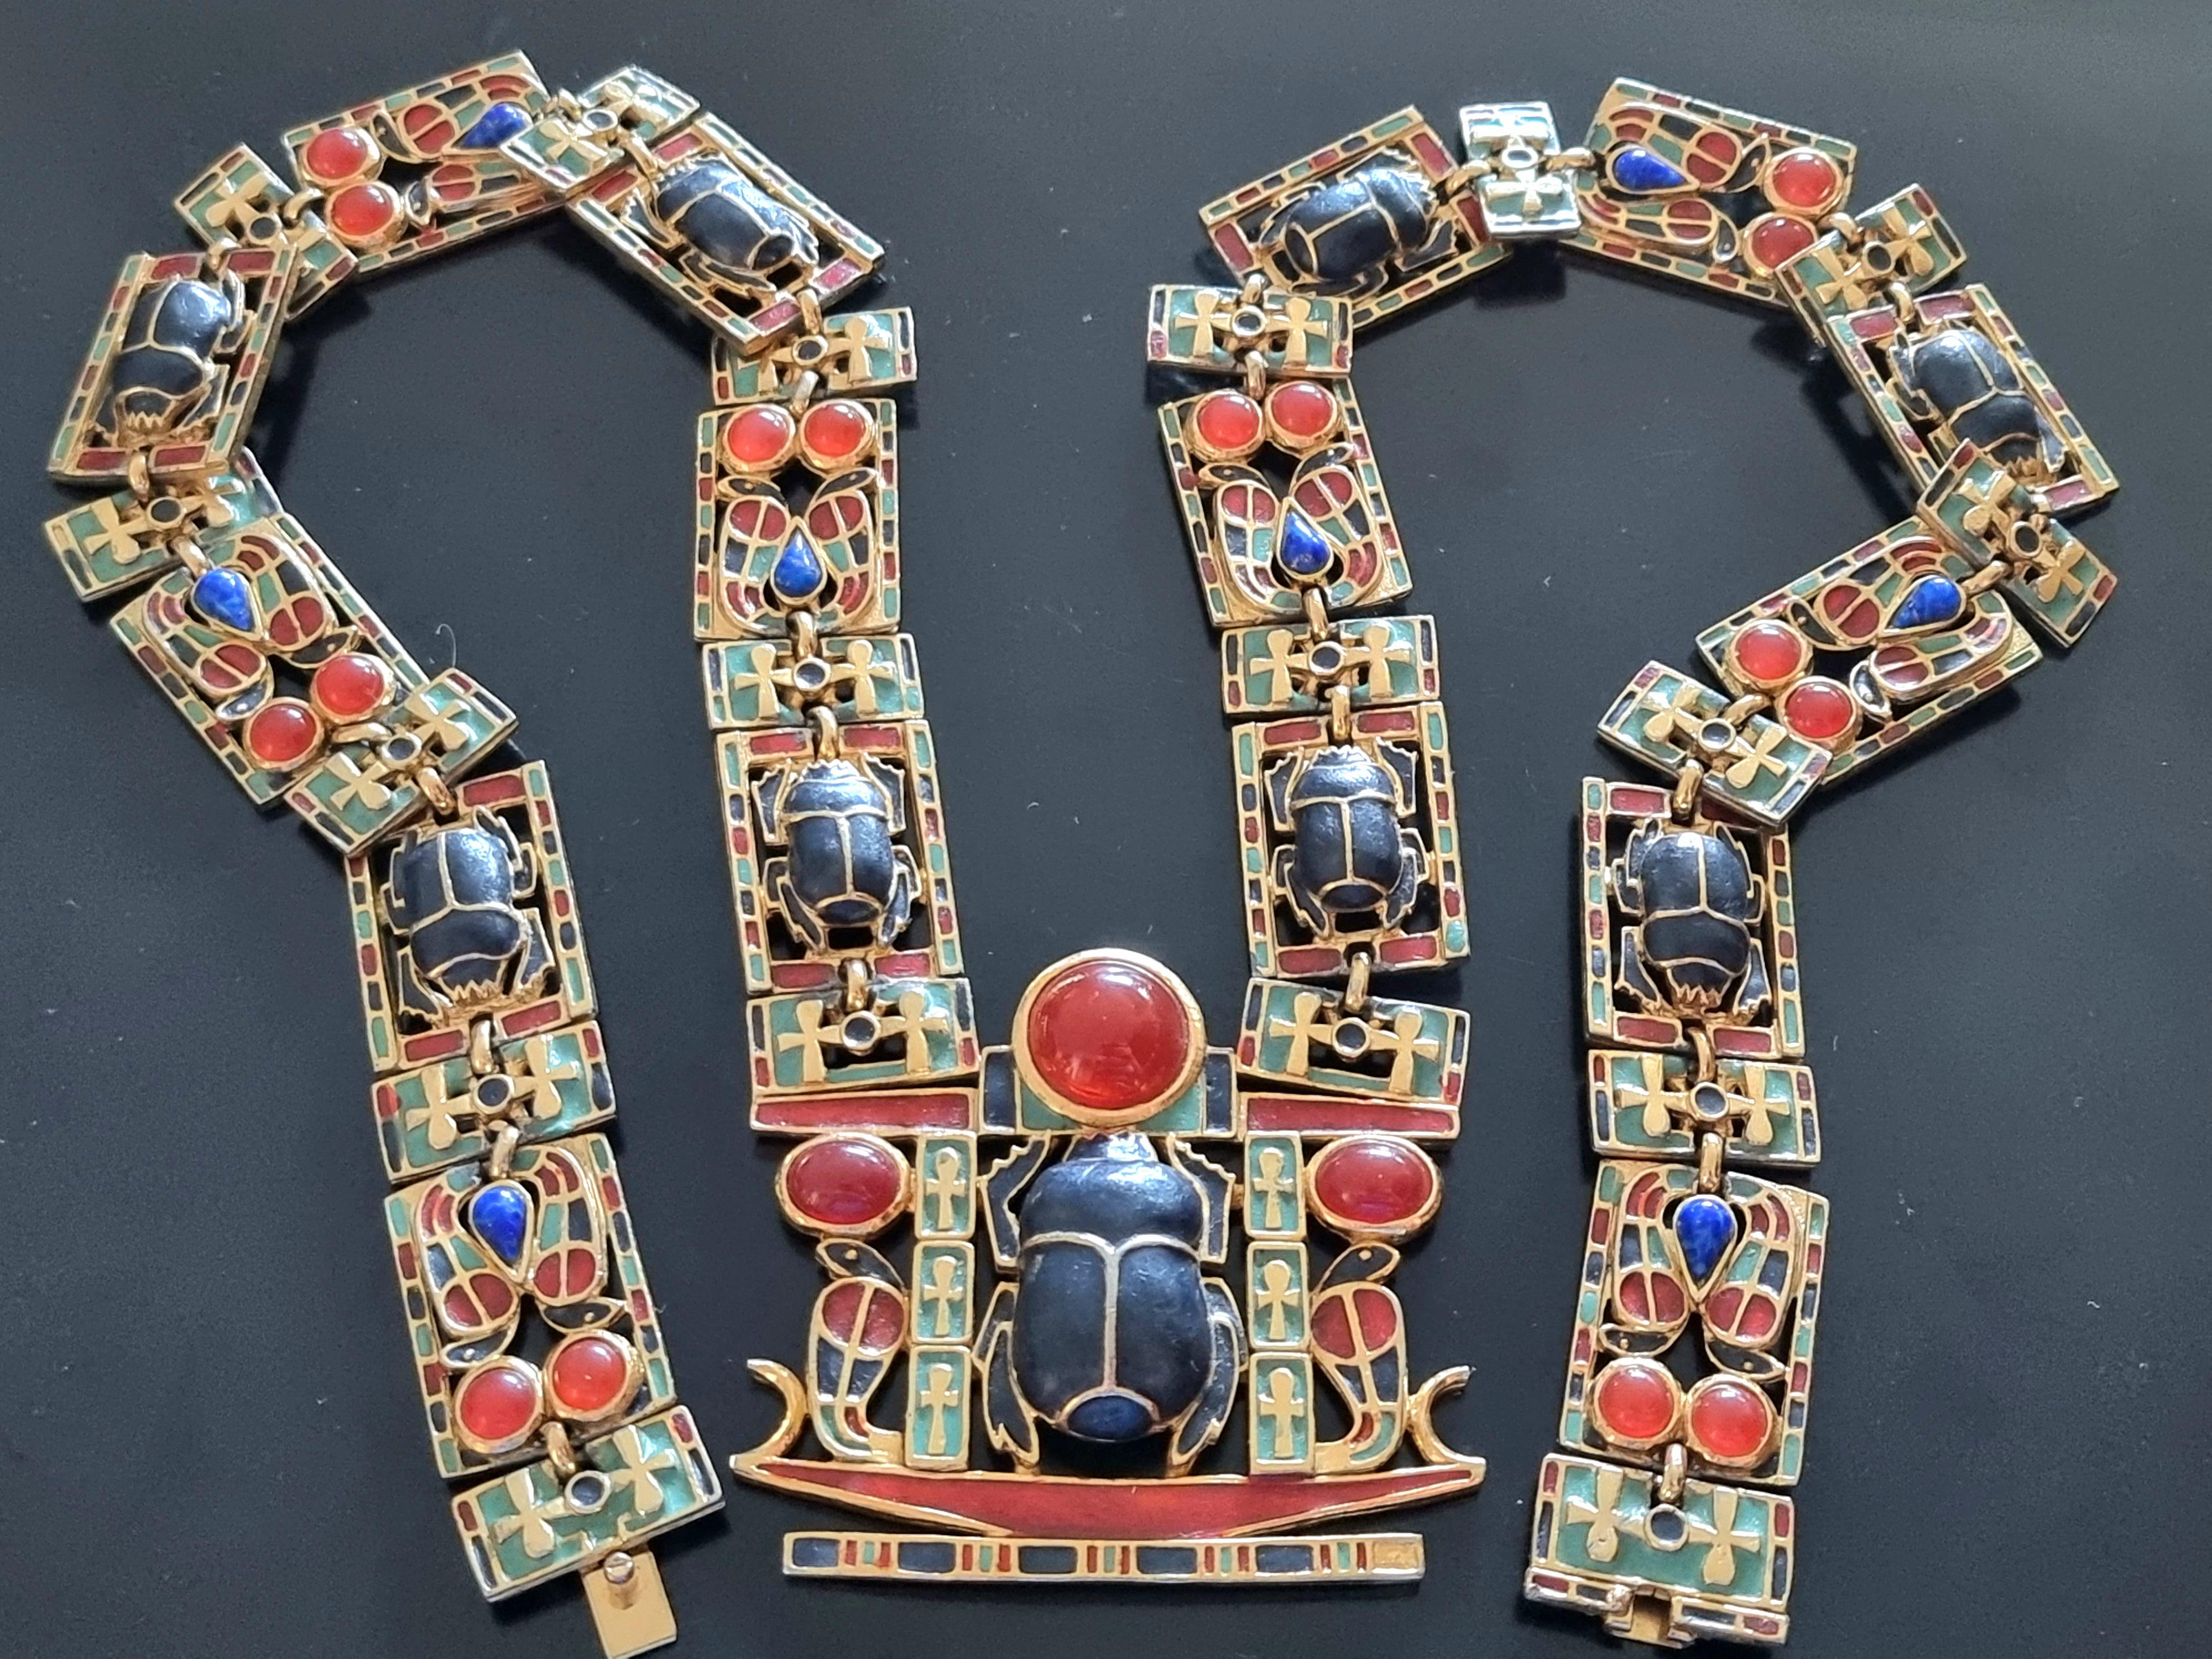 Important old NECKLACE,
NEO-EGYPTIAN Tutankhamun, Scarab Necklace,
60s vintage,
impressive work of French artist,
gold-plated metal, enamel, glass cabochons,
length 71 cm, width 2 cm, weight 227 g,
pendant 6 x 6.5 cm,
very good state.

The release